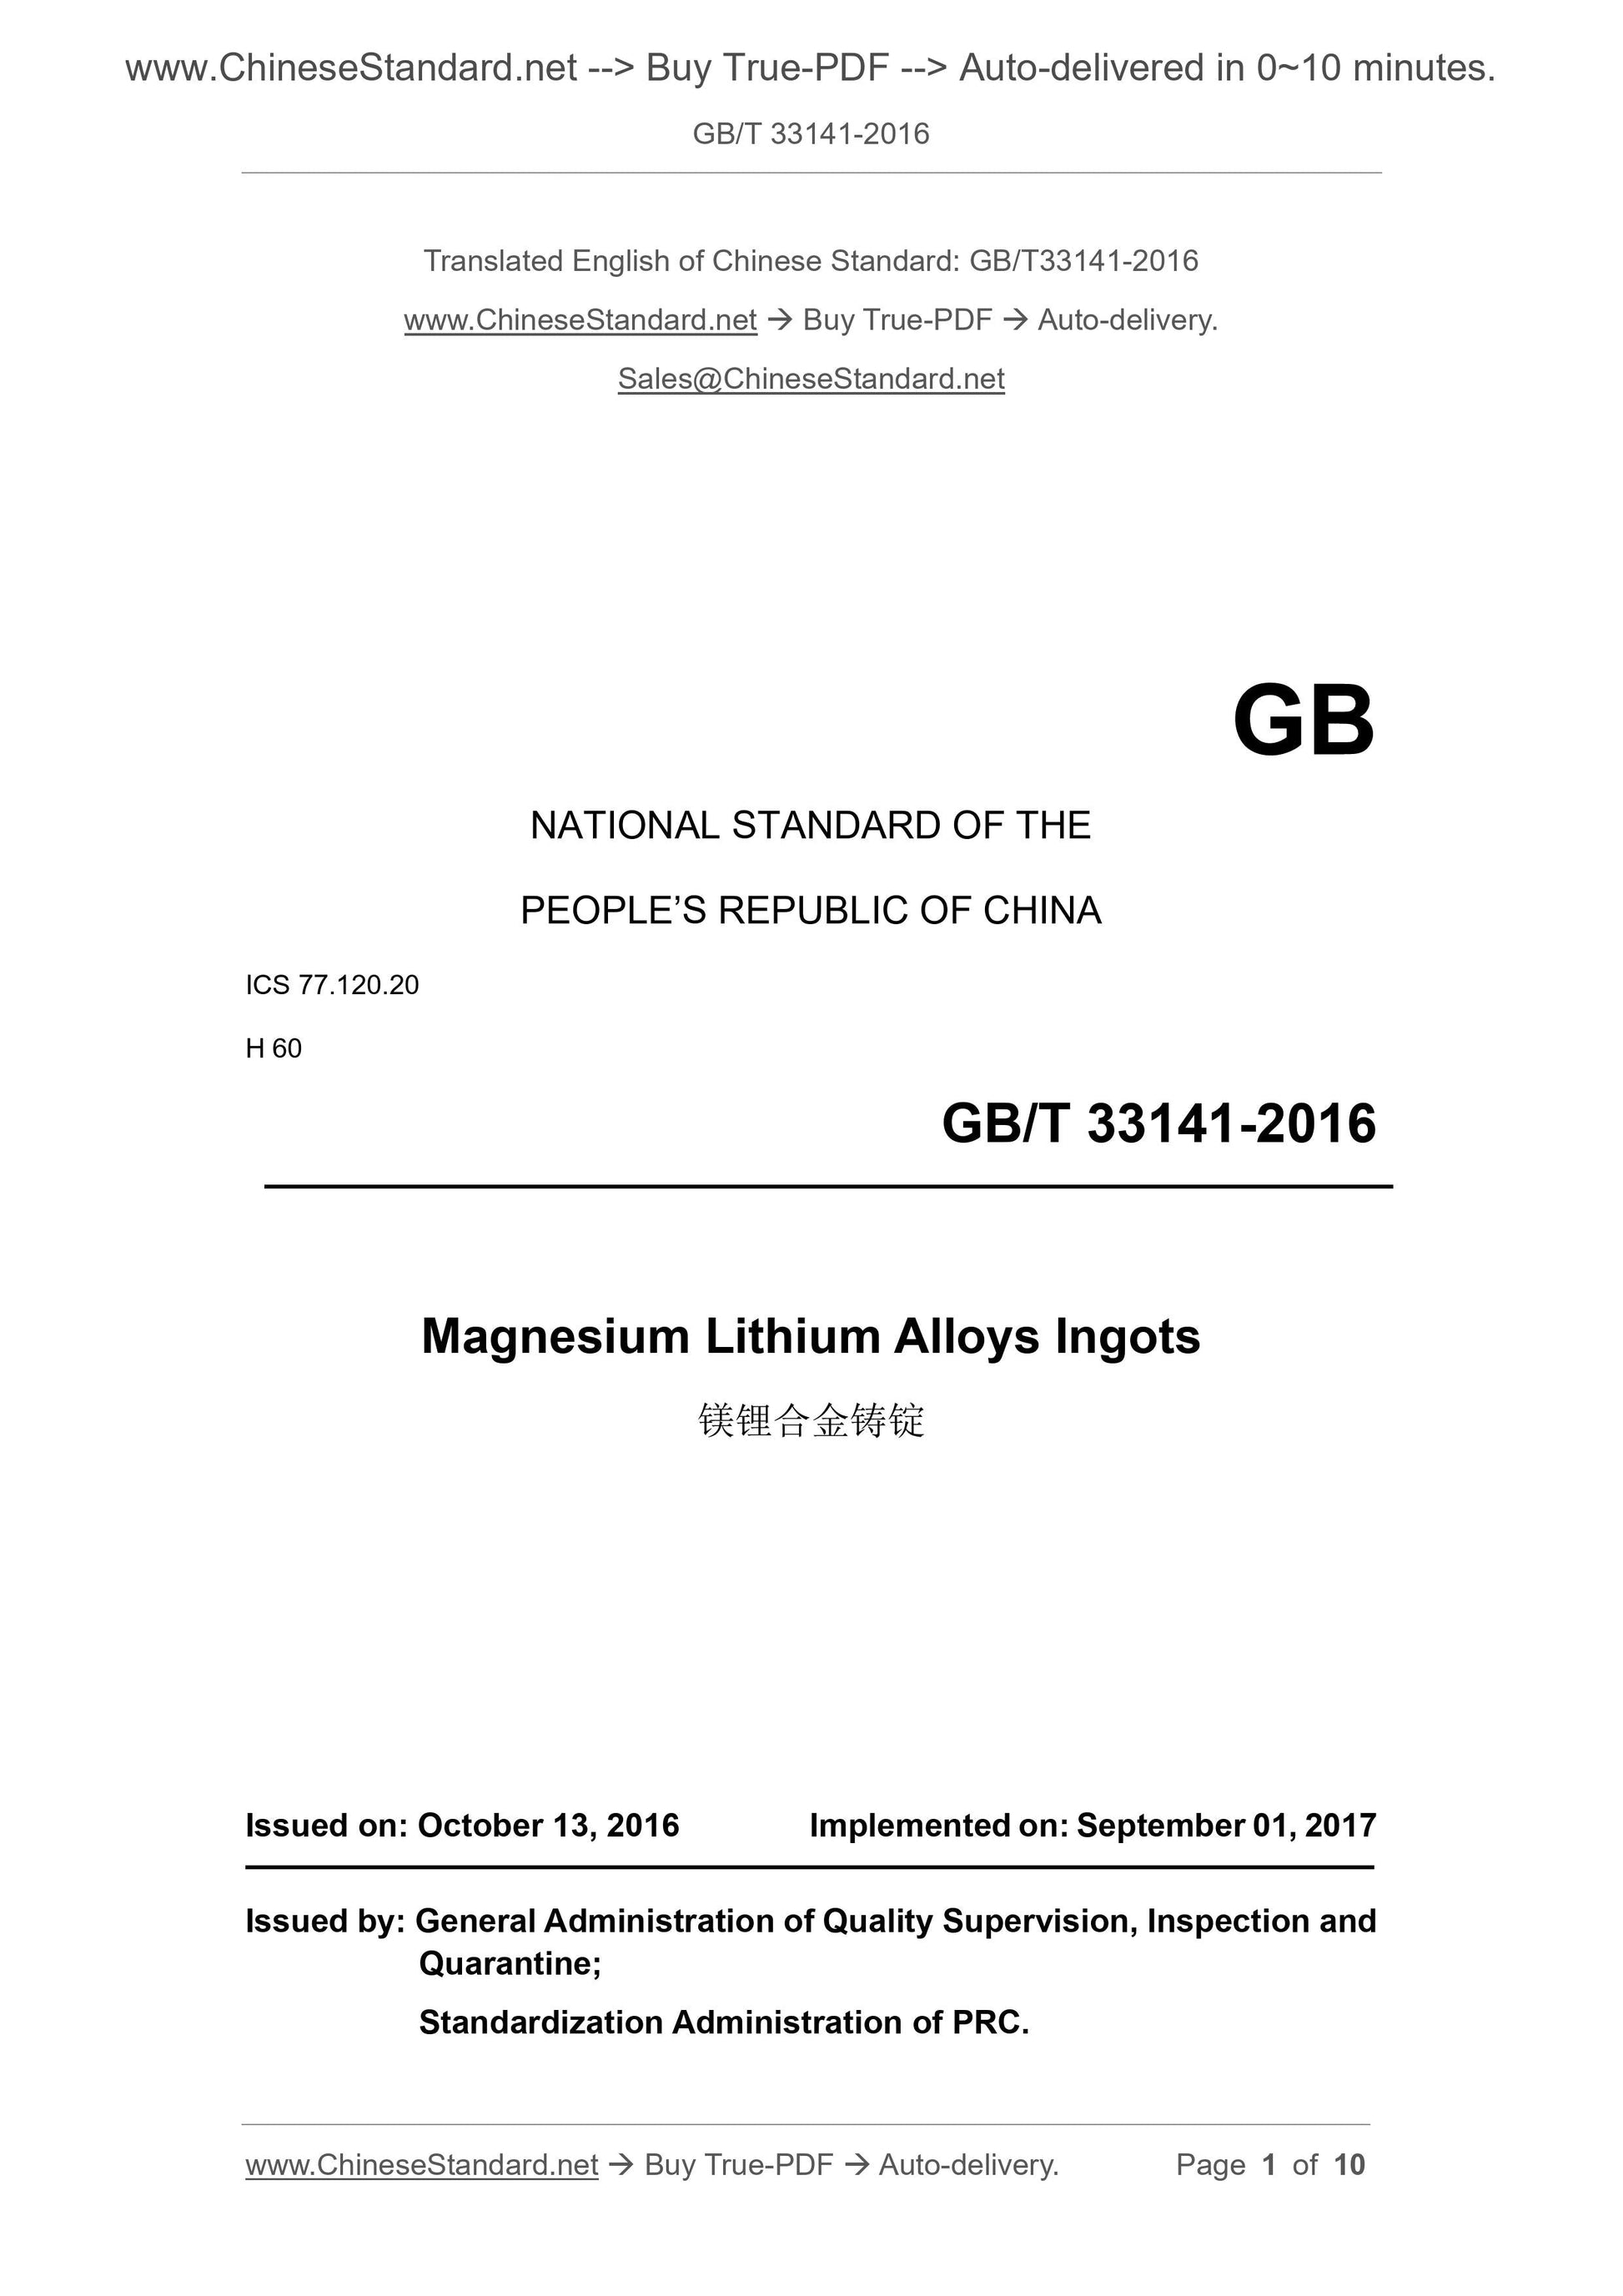 GB/T 33141-2016 Page 1